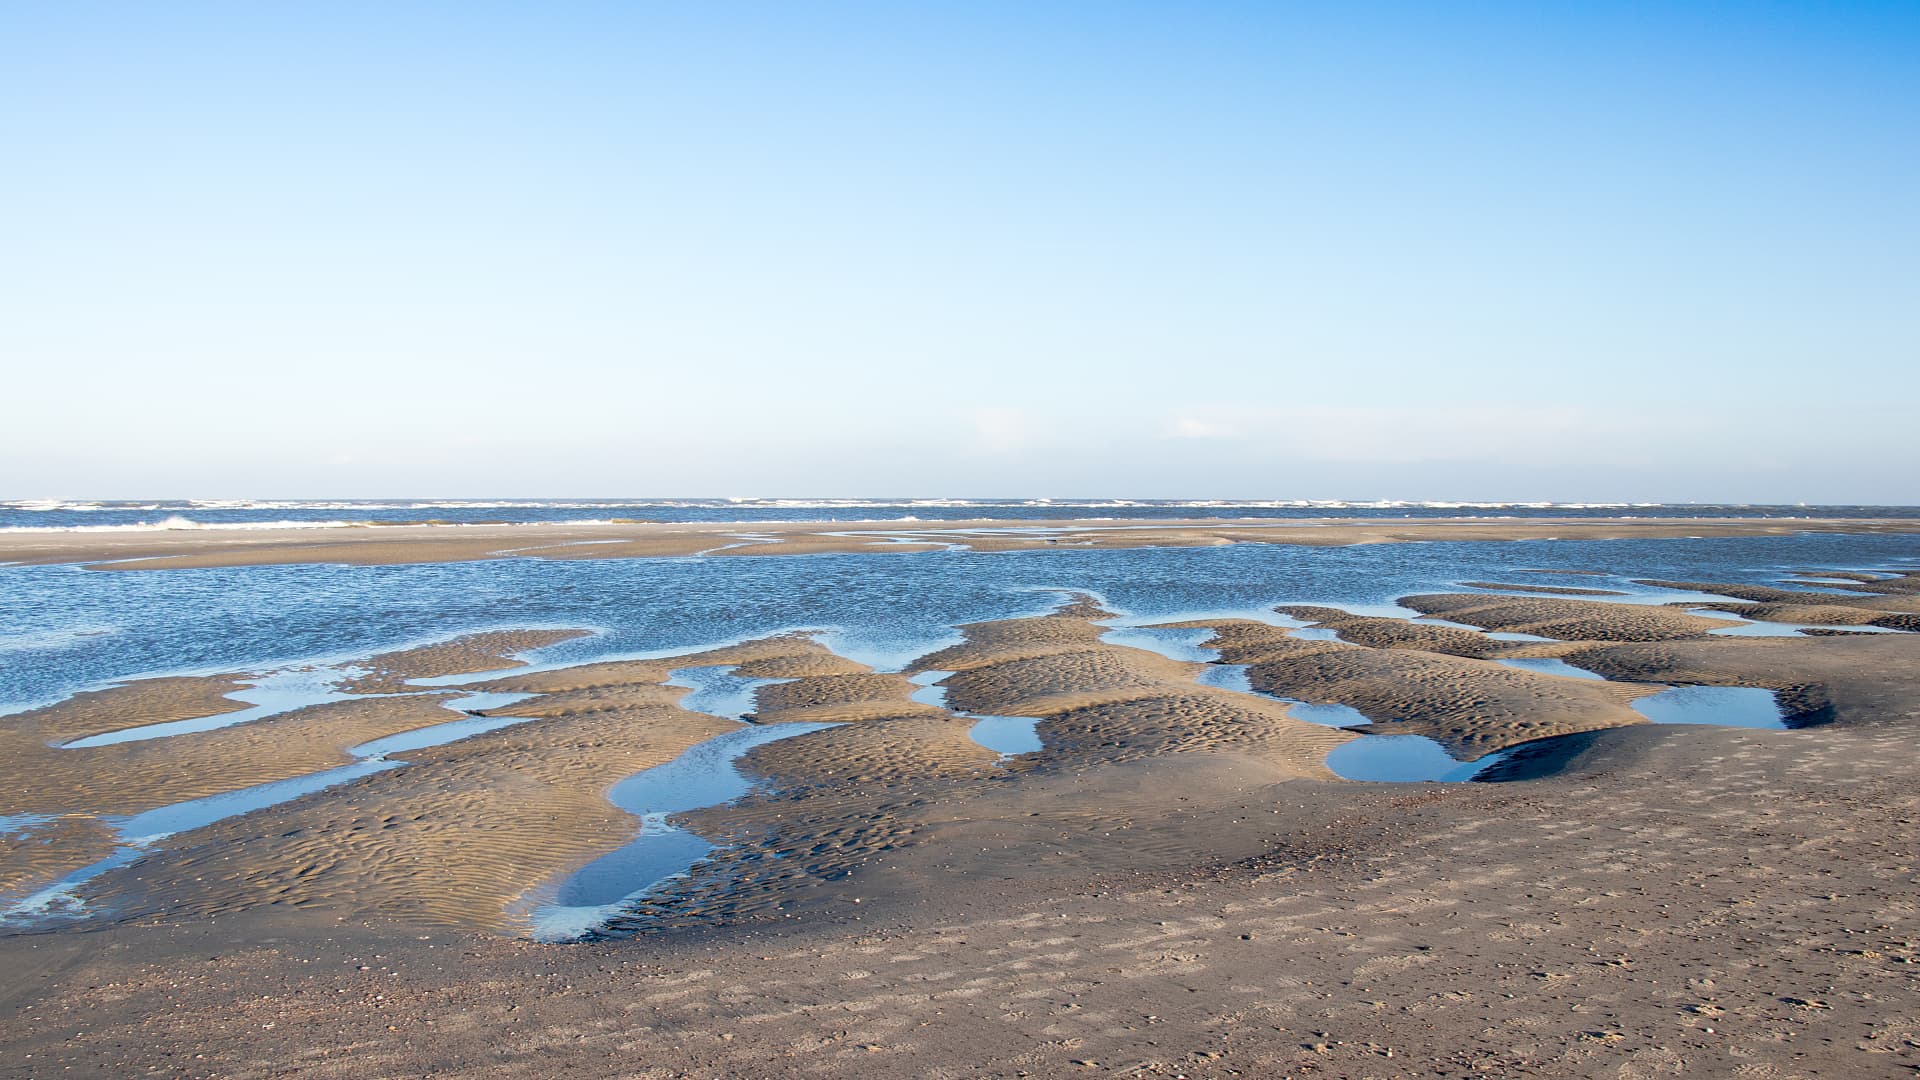 What wave fronts in the Wadden Sea do they have in common with solitons